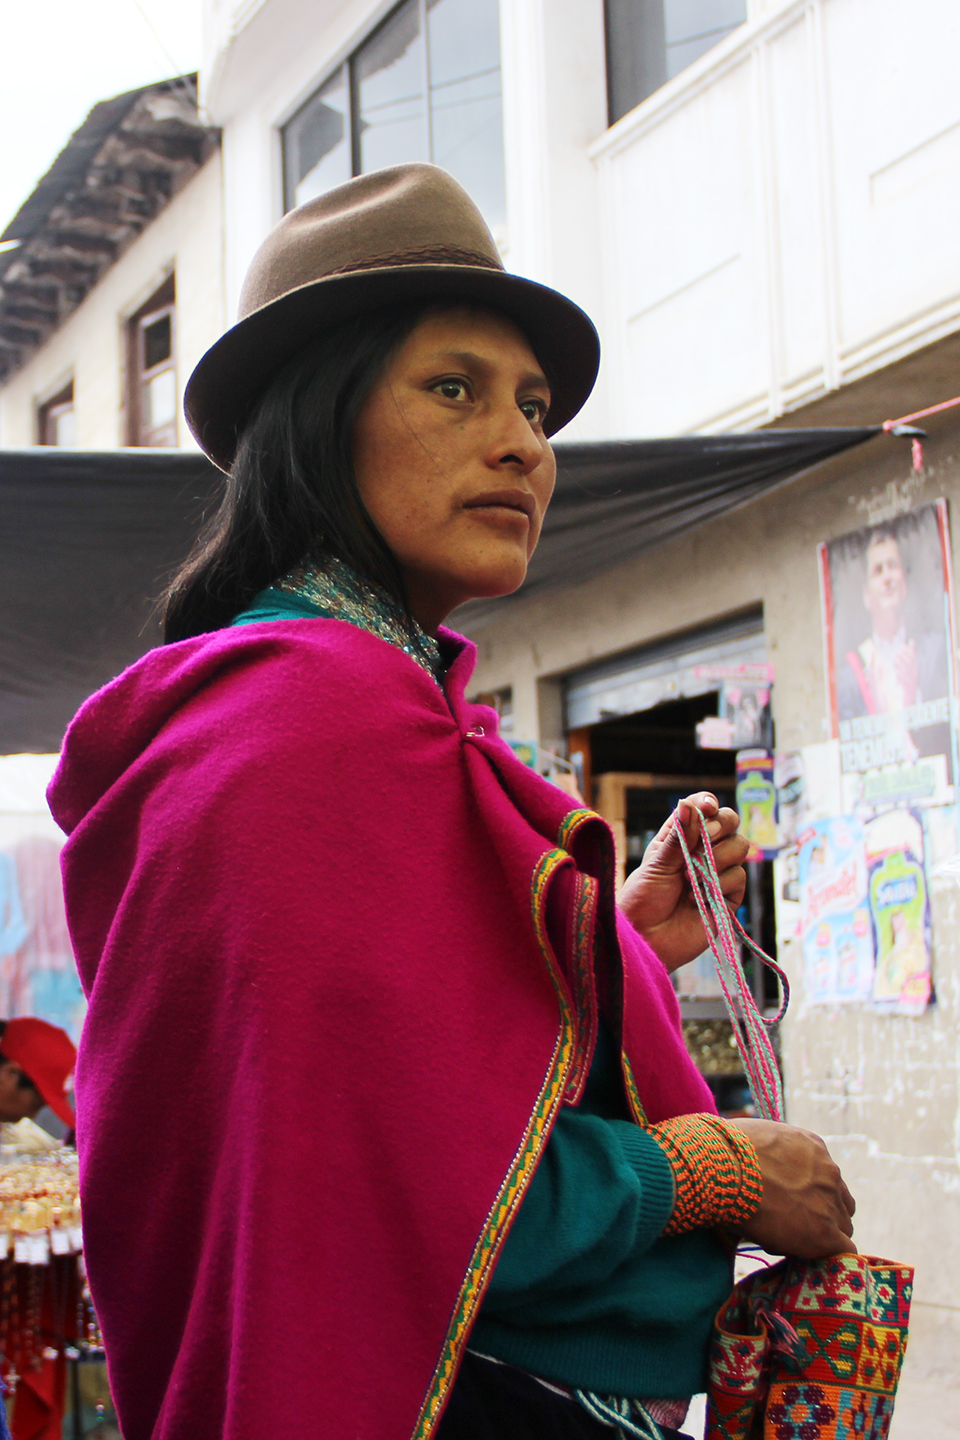 The beauty of Andean woman. Only God knows what goes through the mind of this beautiful Indigenous artisan woman.